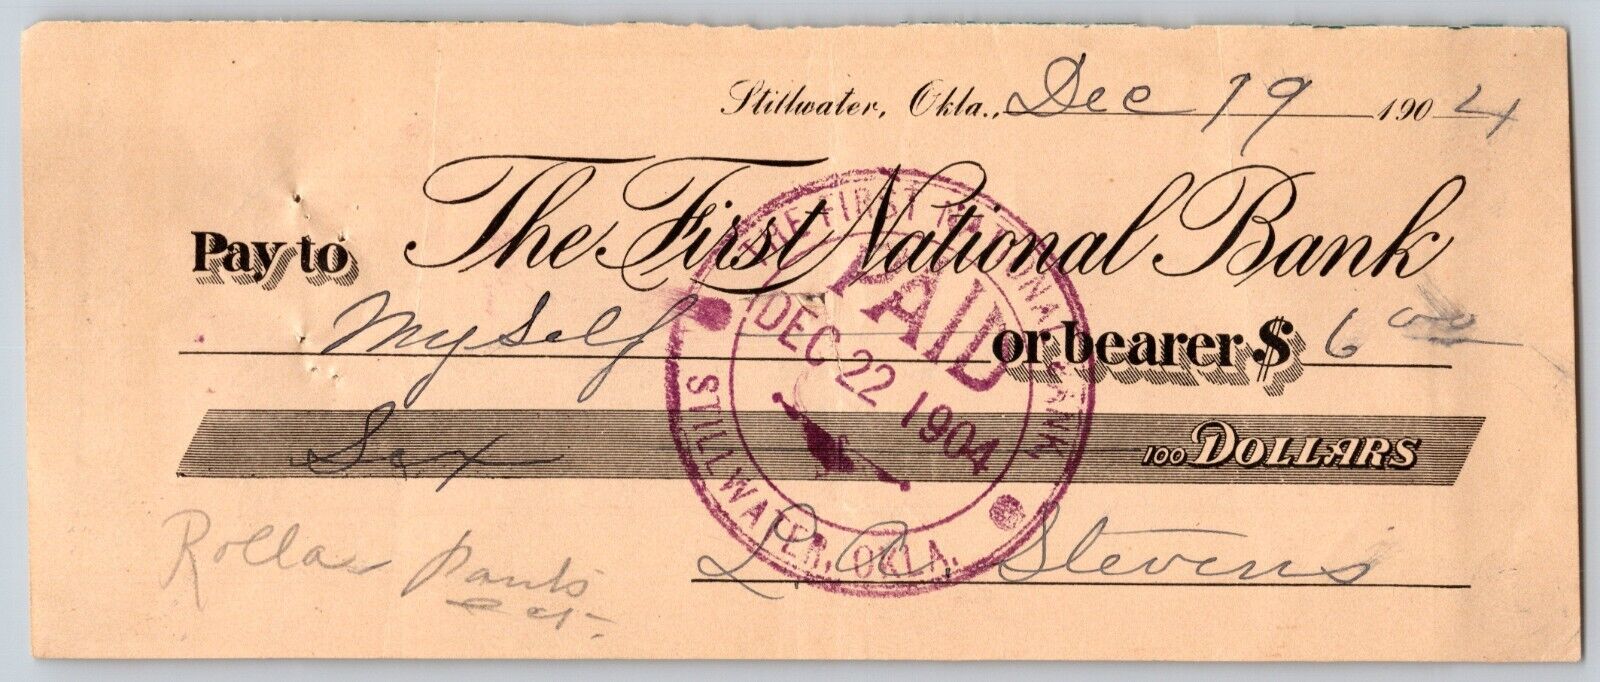 Stillwater, Territorial Oklahoma 1904 First National Bank Check